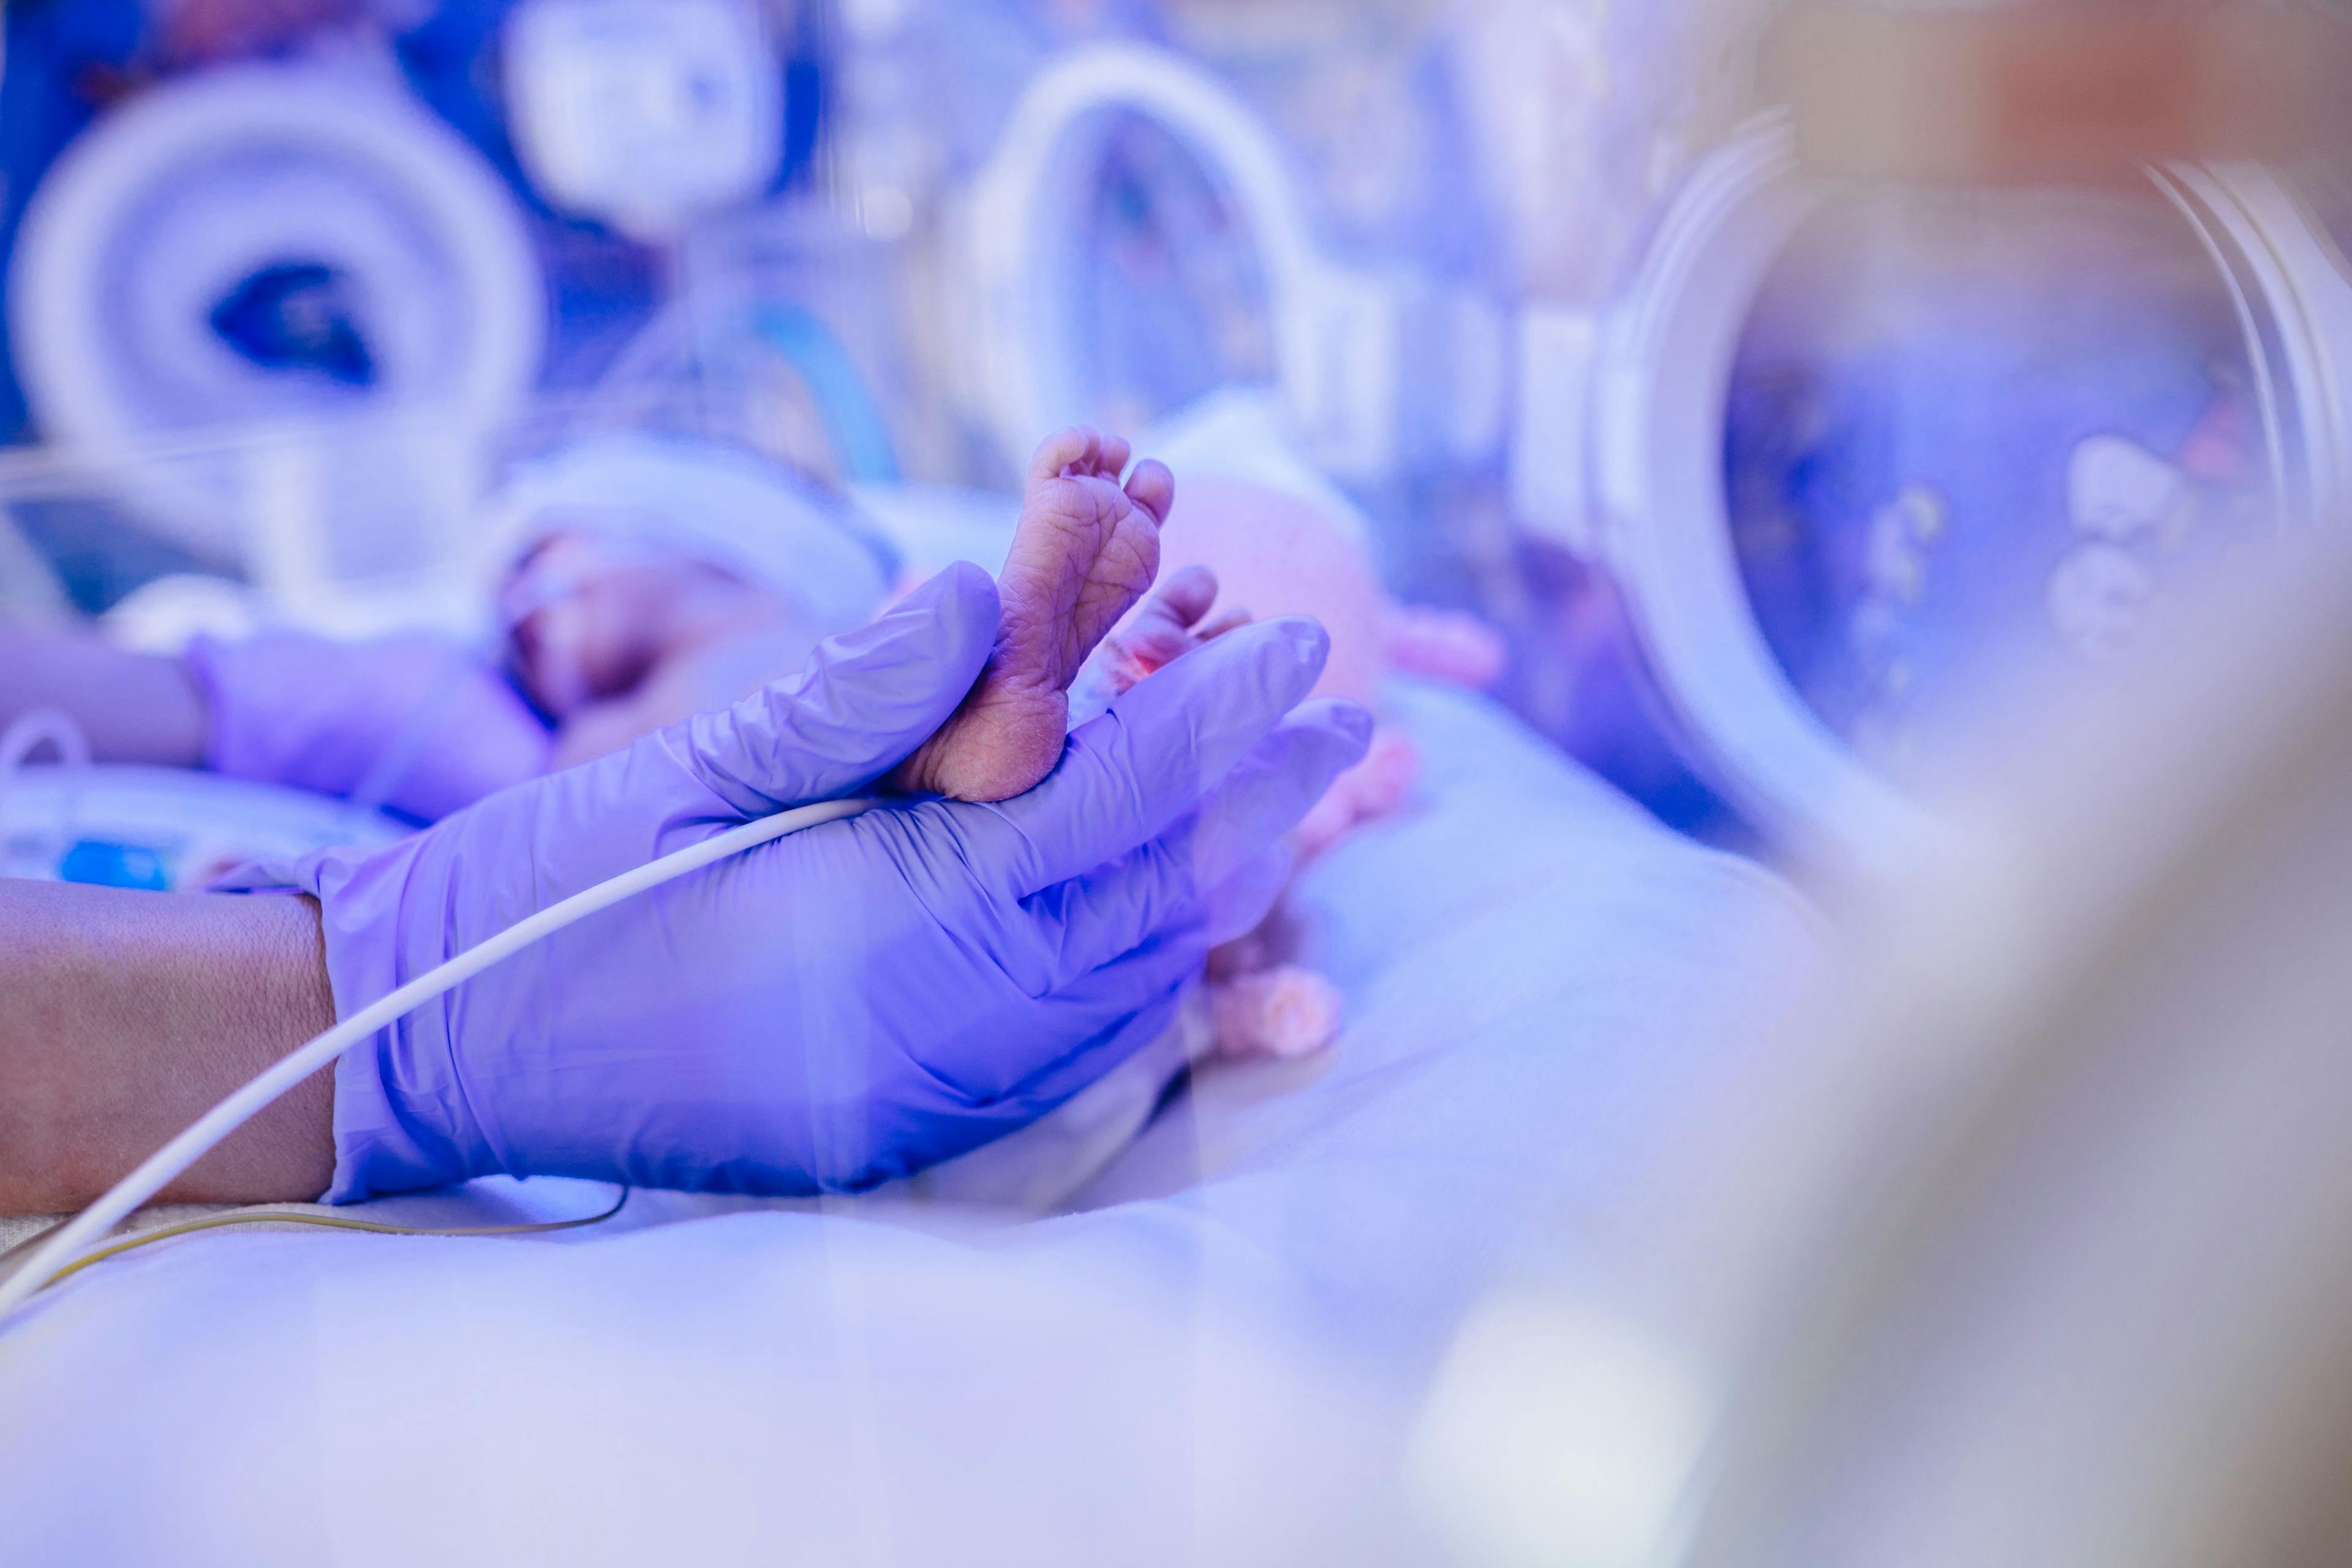 Macro photo of doctor's hands and legs of a child. Newborn is placed in the incubator. Neonatal intensive care unit | Image Credit: Iryna - stock.adobe.com